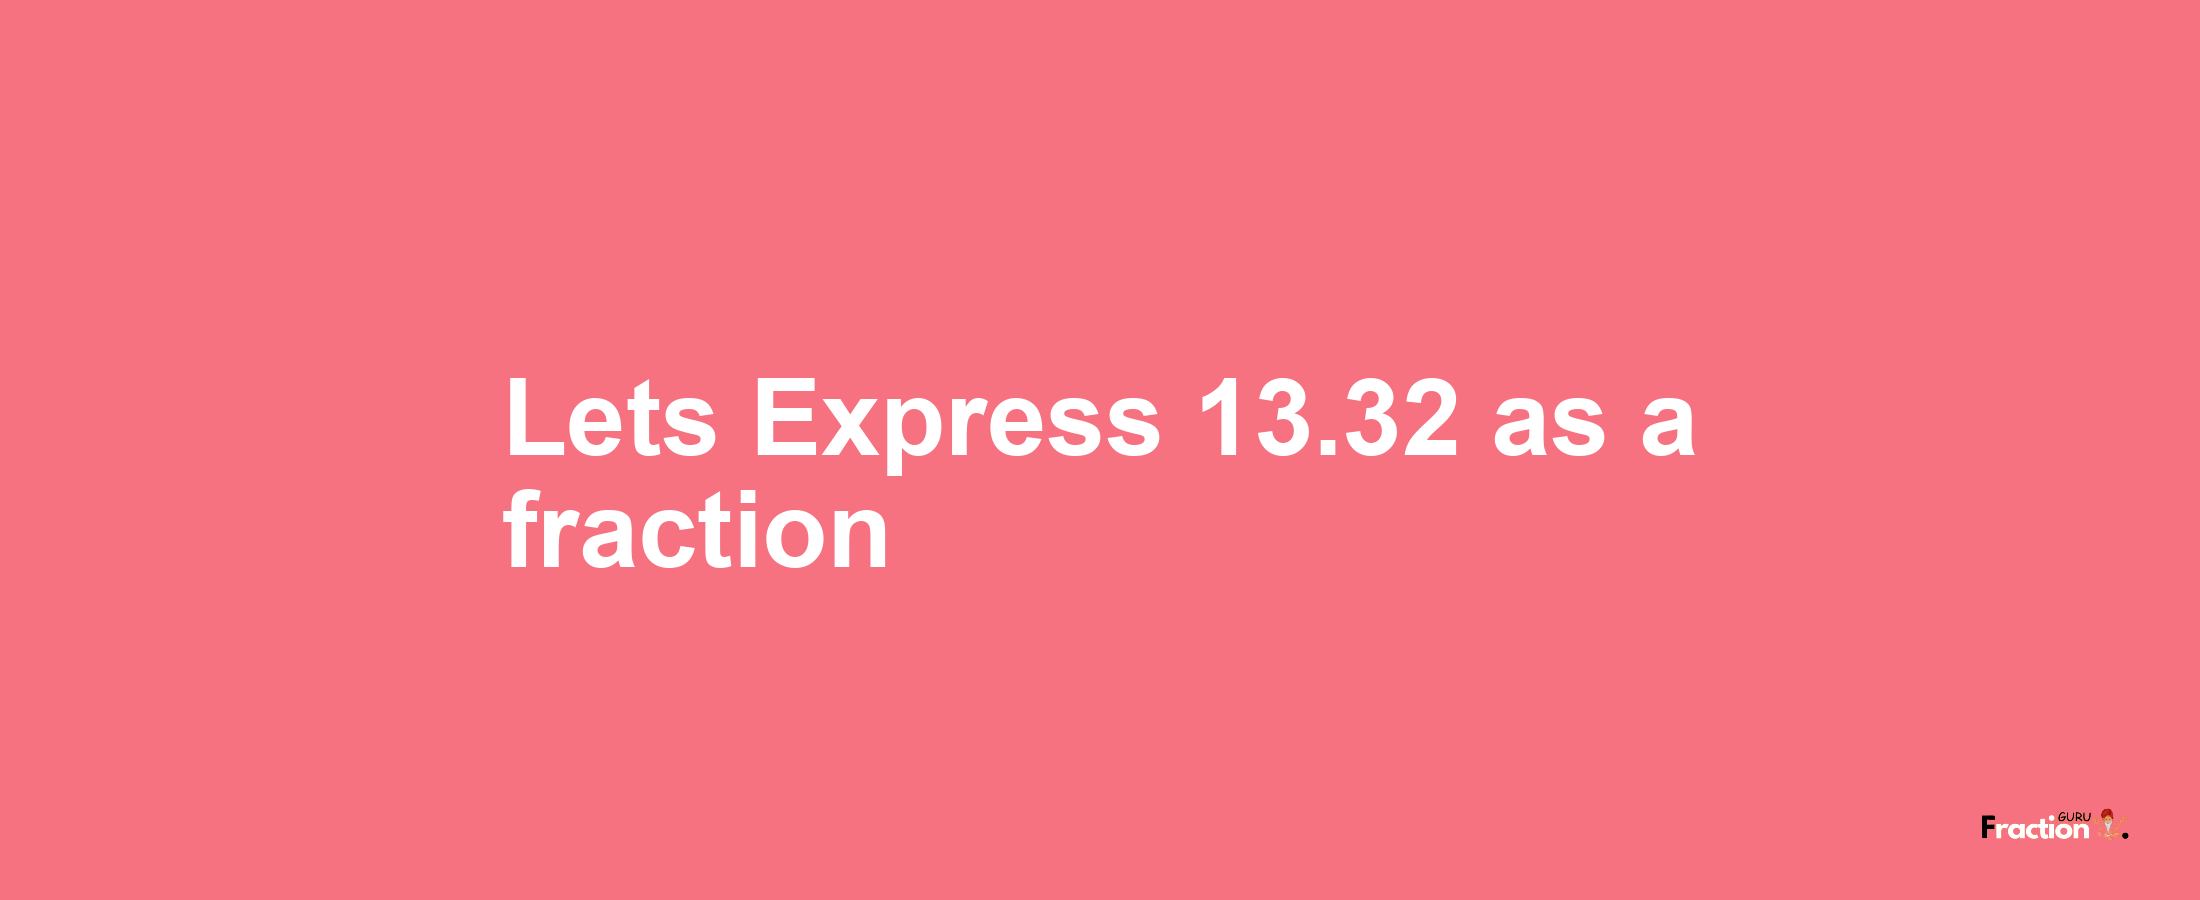 Lets Express 13.32 as afraction